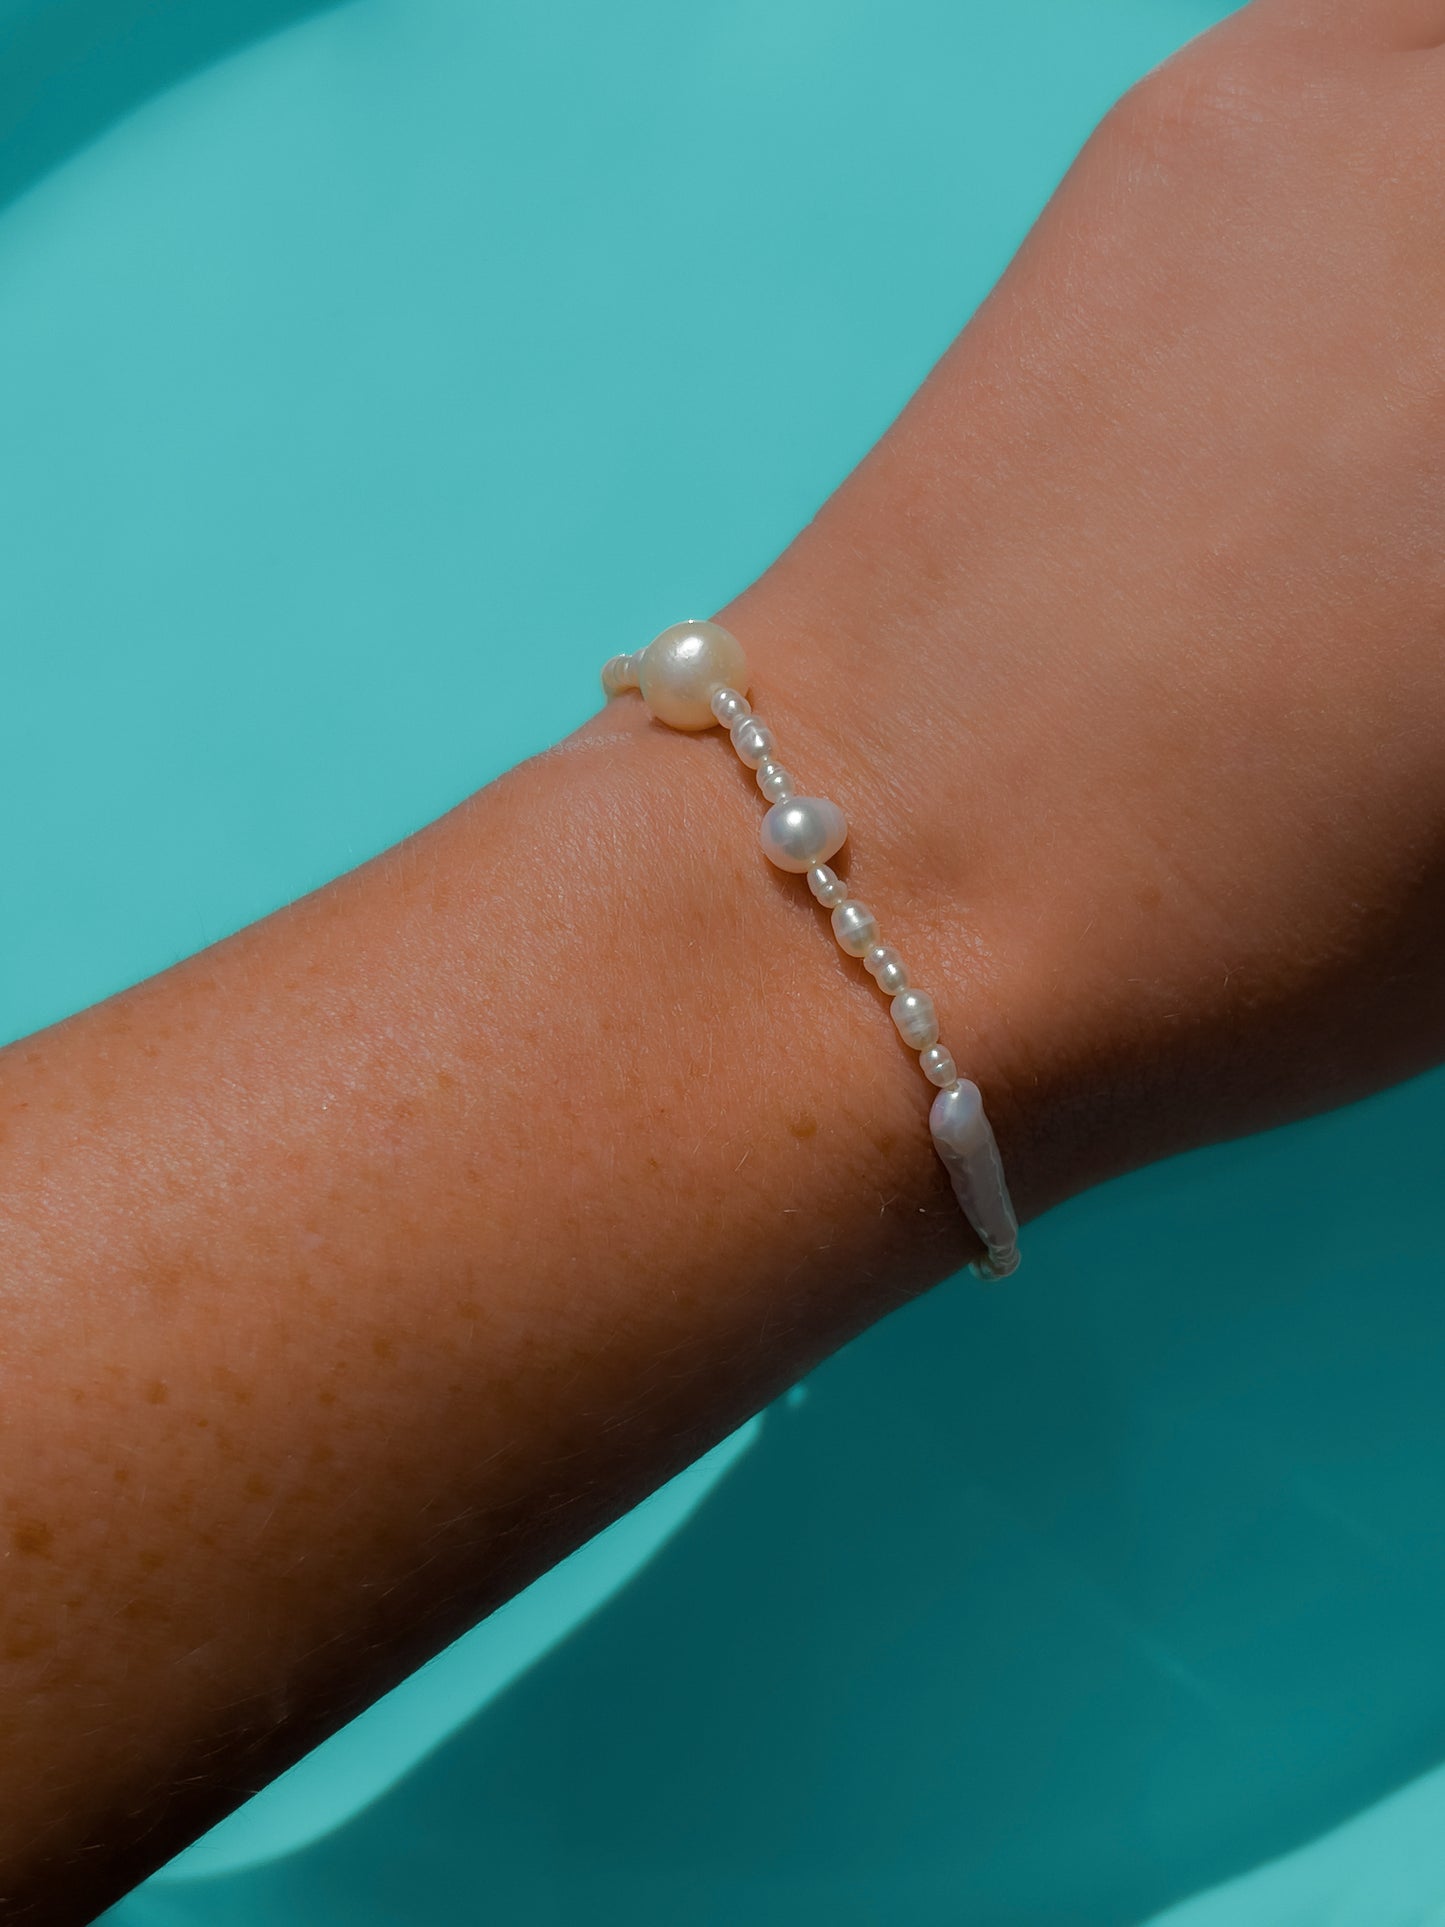 Biwa Pearl Bracelet. Natural elongated Biwa pearls placed off centre with a bold spherical Freshwater pearls. Using natural AAA quality freshwater pearls, in a minimal asymmetrical design. 14 Karat Gold filled Sterling Silver hardware finishes the piece.